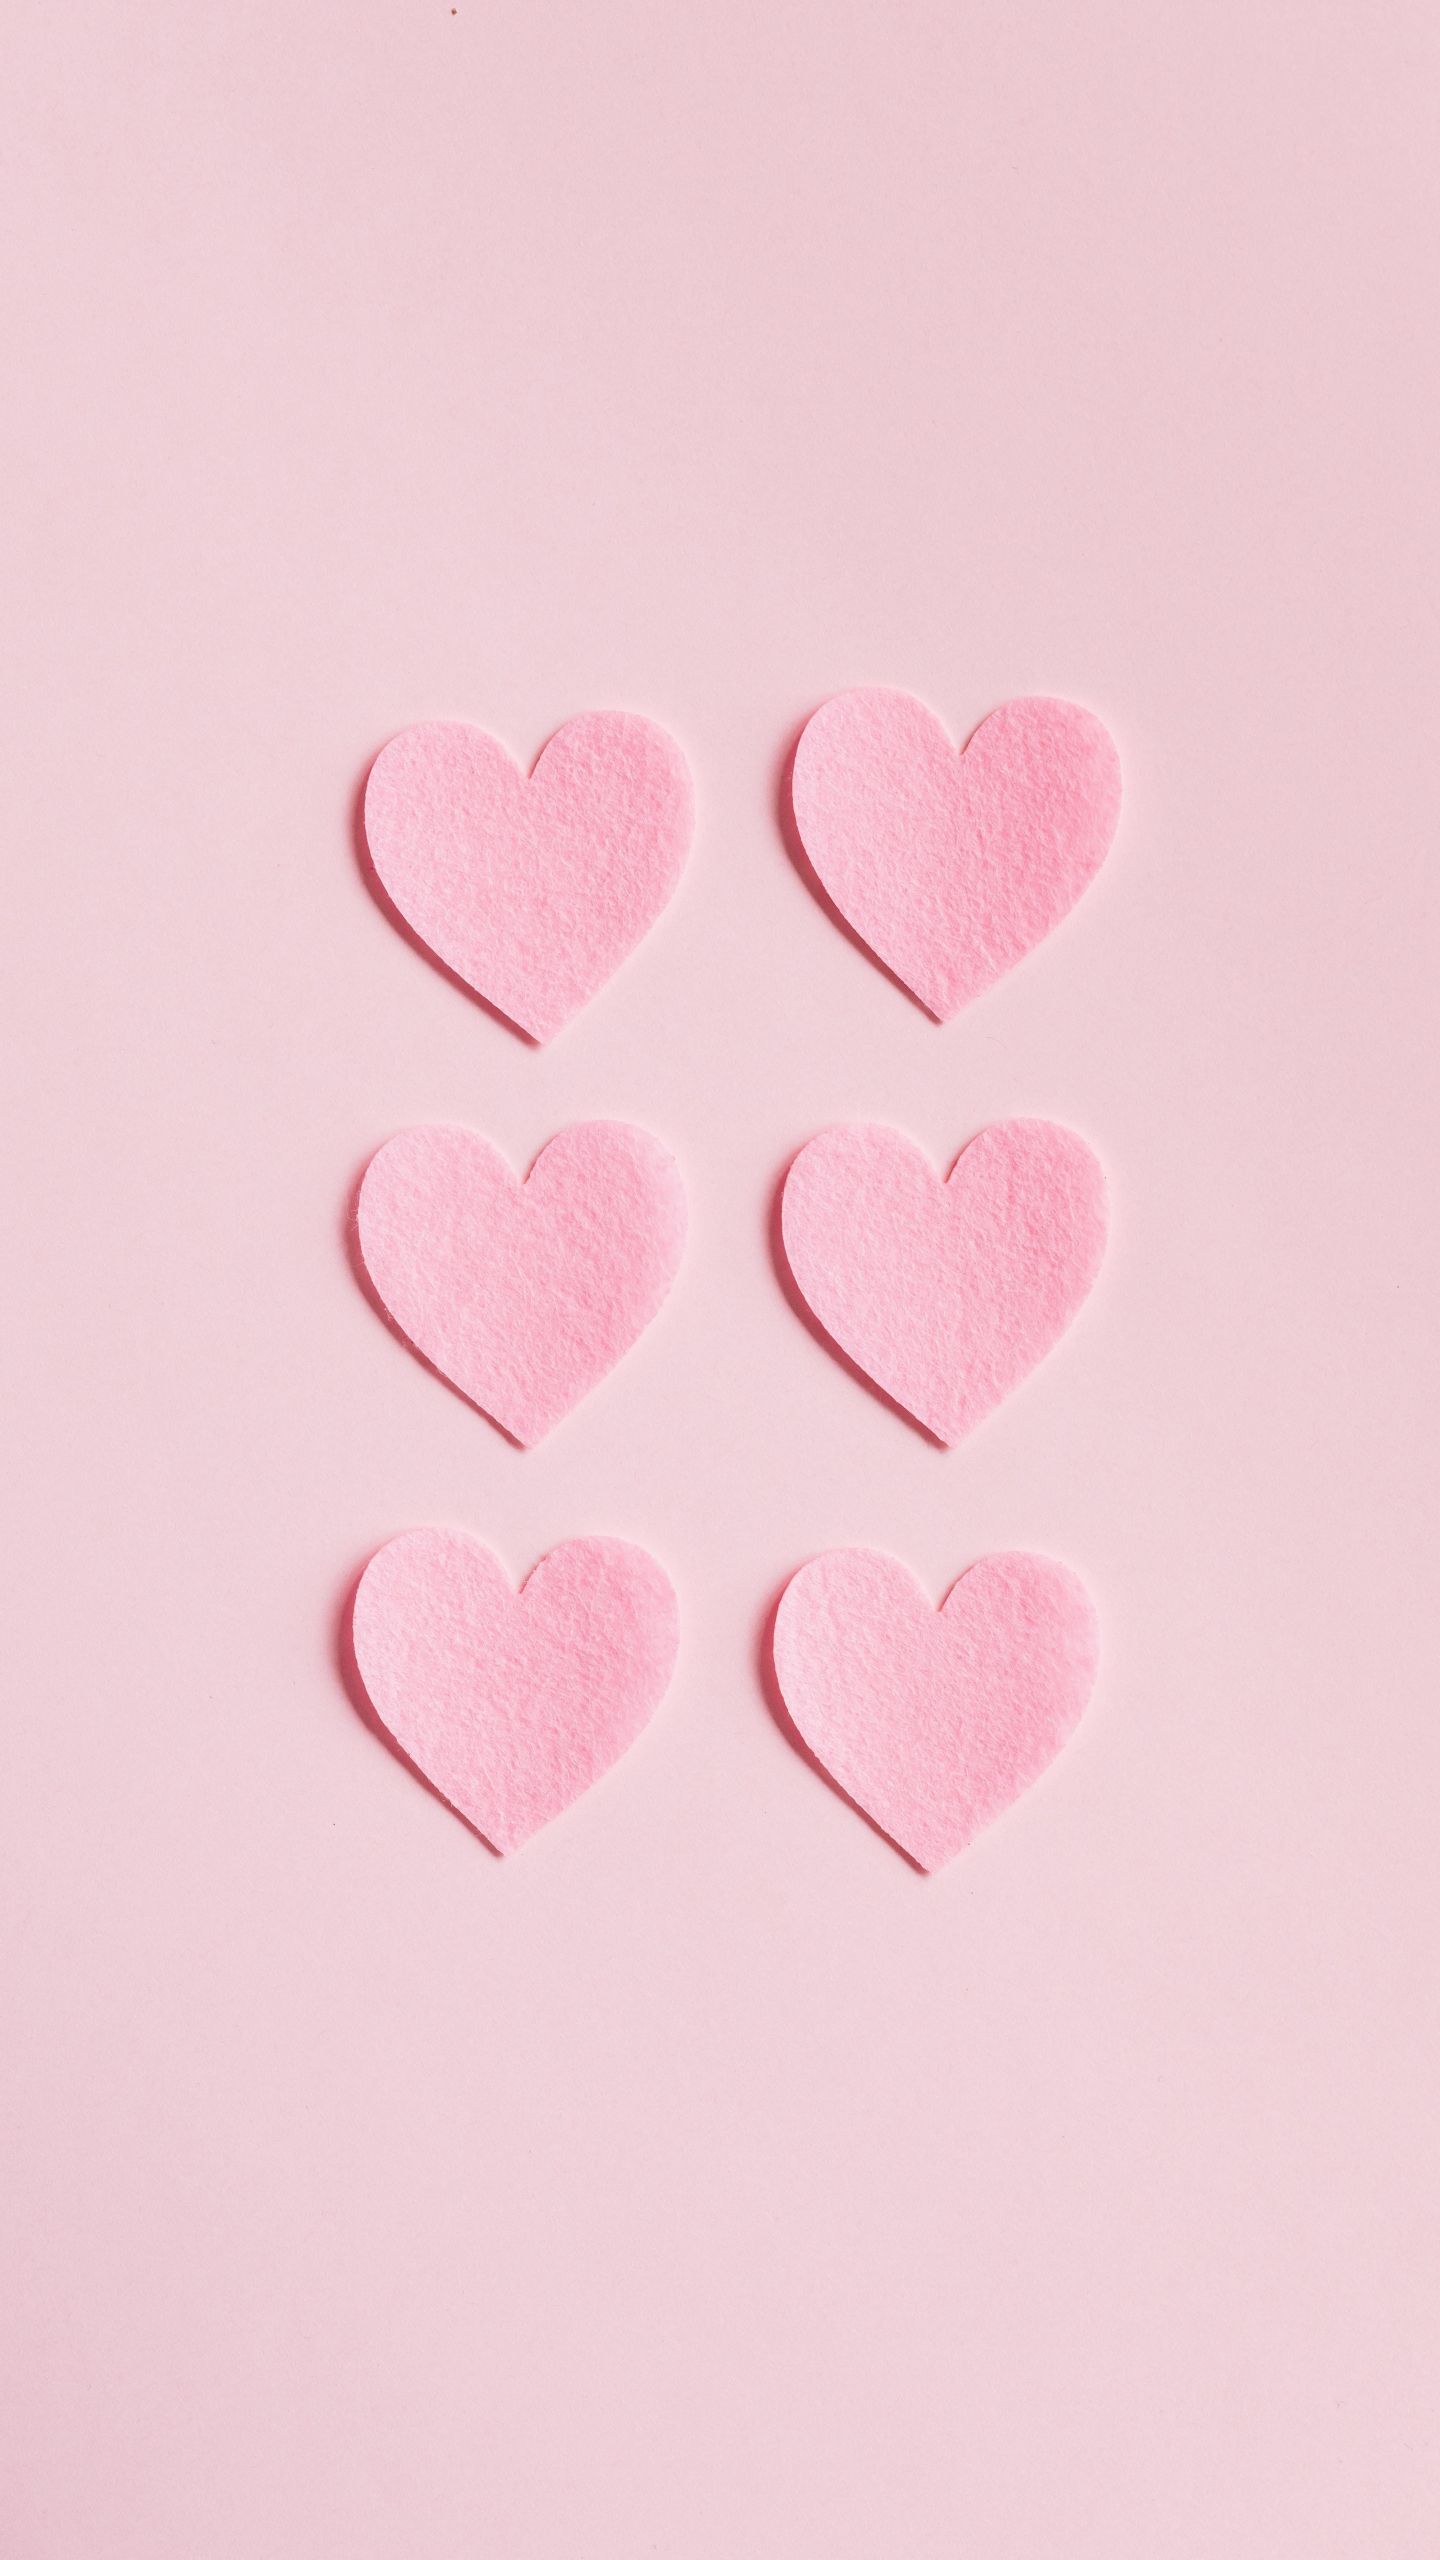 Four pink hearts are on a light colored background - Pink heart